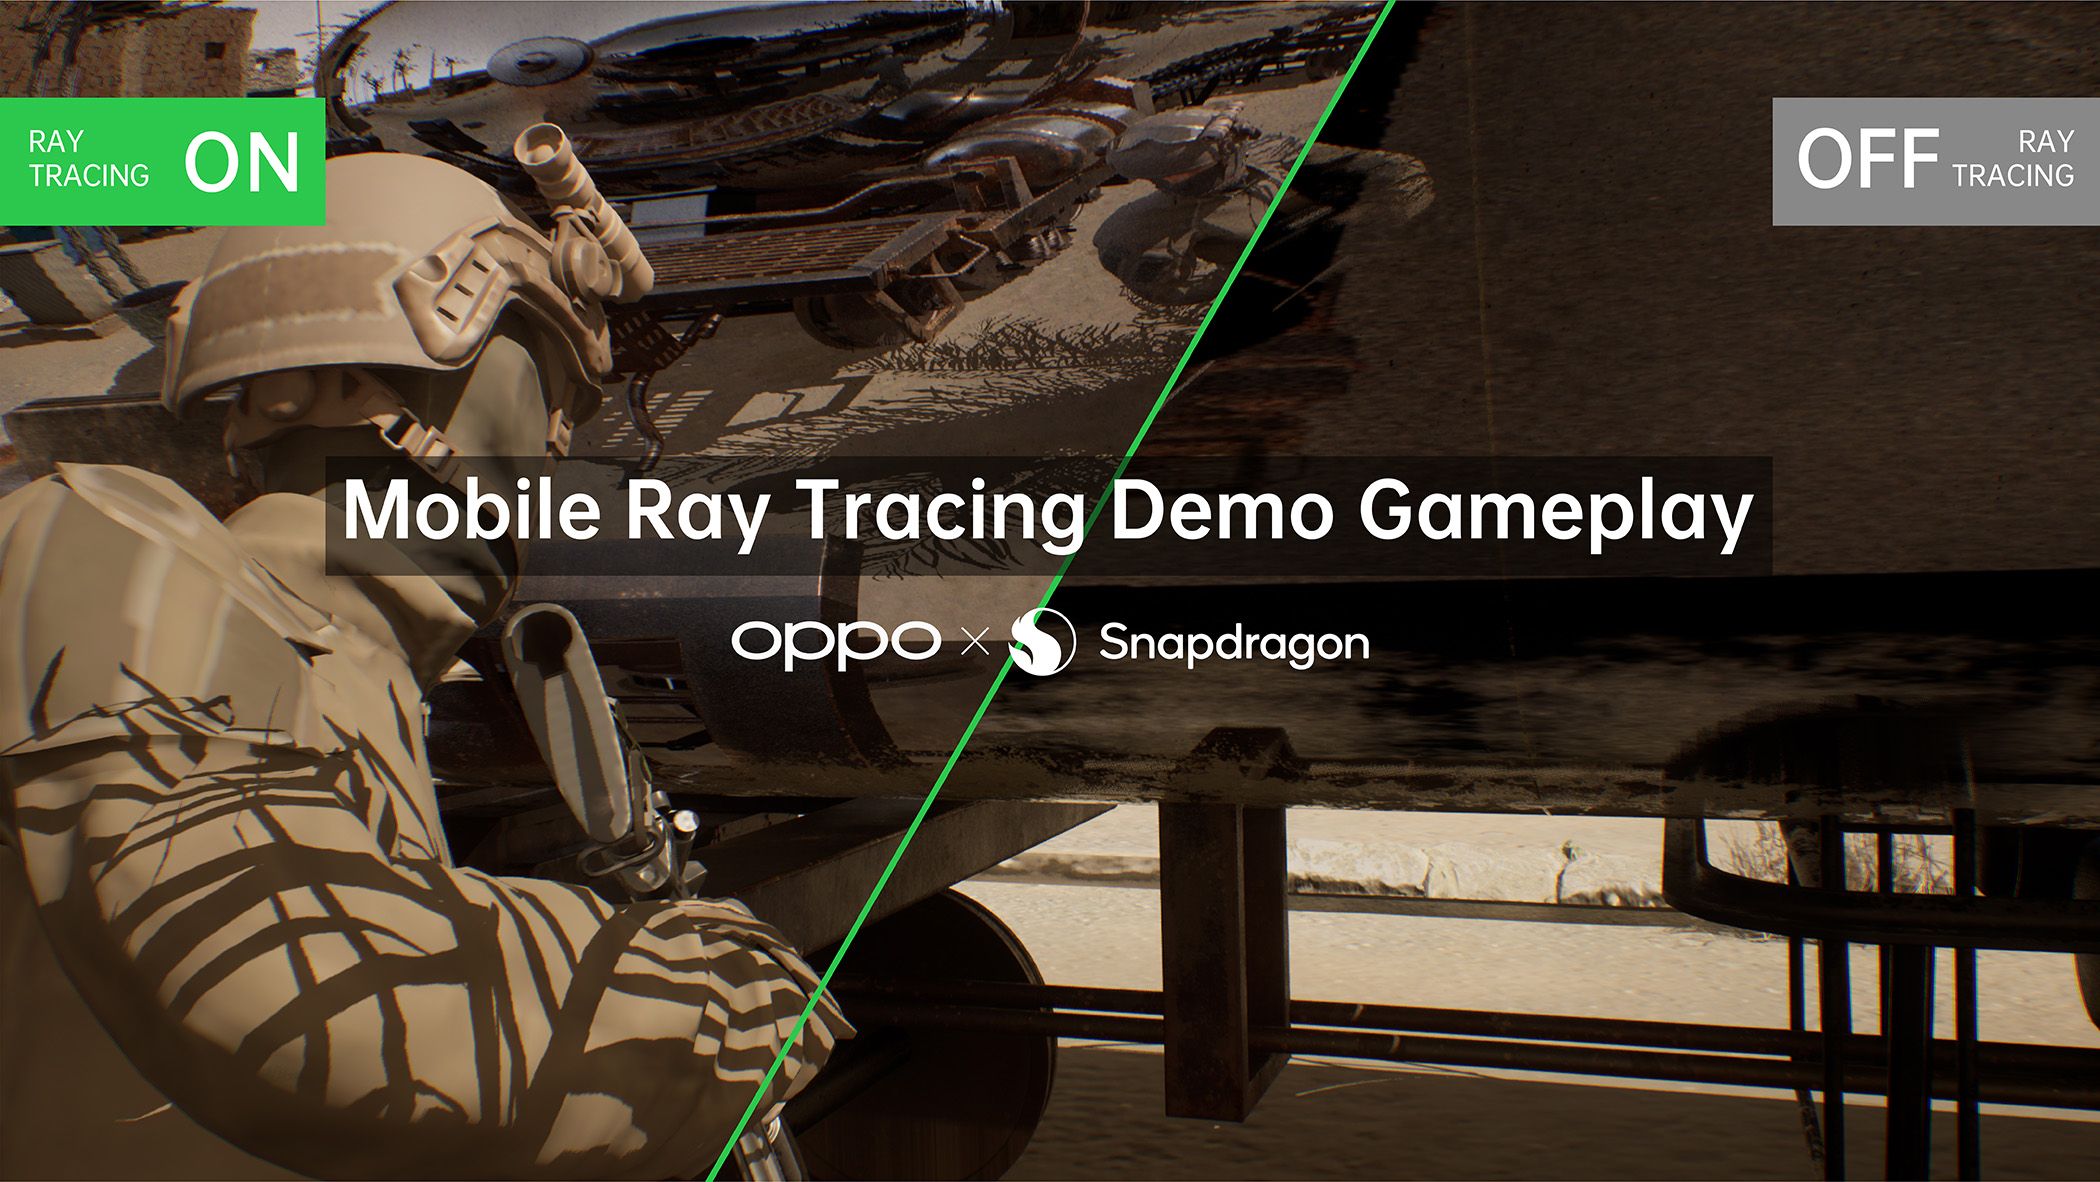 Oppo mobile ray tracing solution demo gameplay banner image.